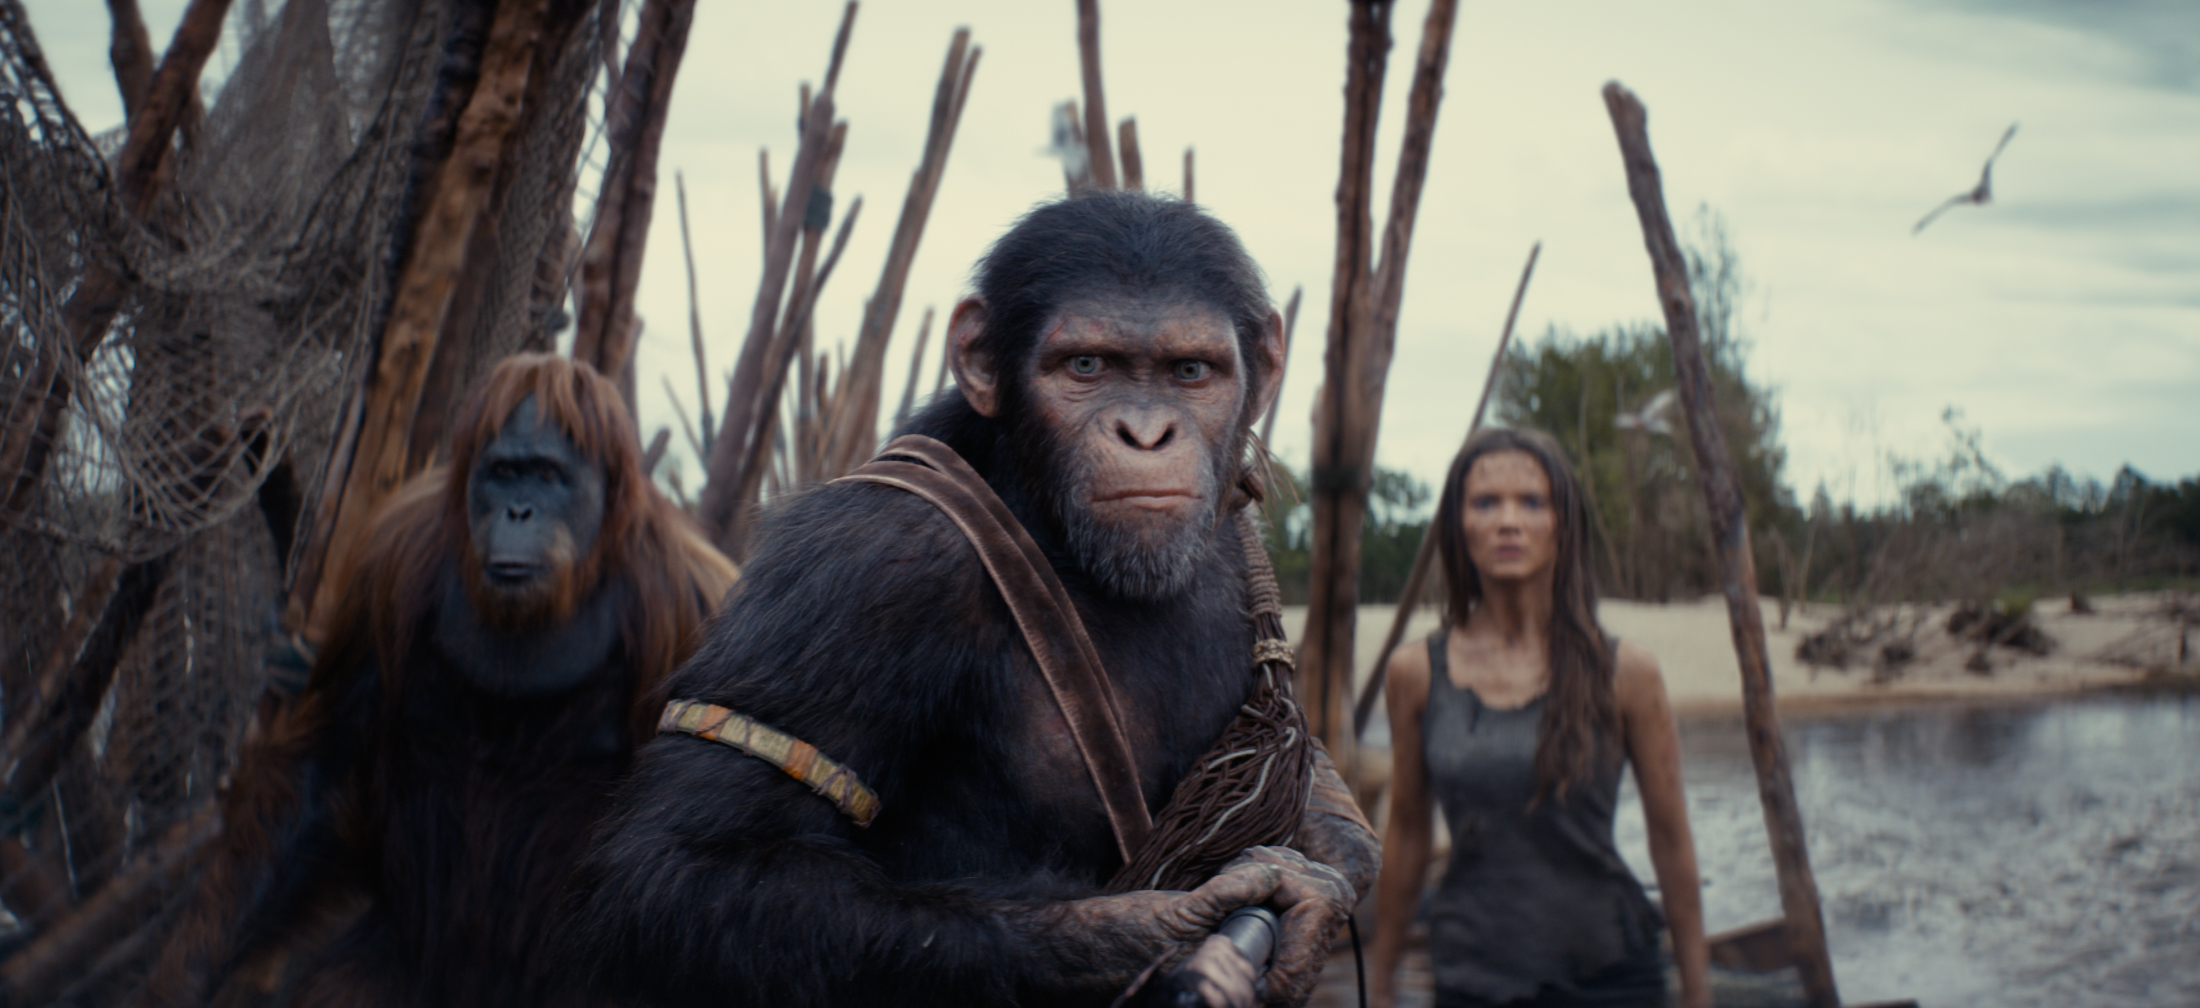 Kingdom of the Planet of the Apes Arrives on Digital